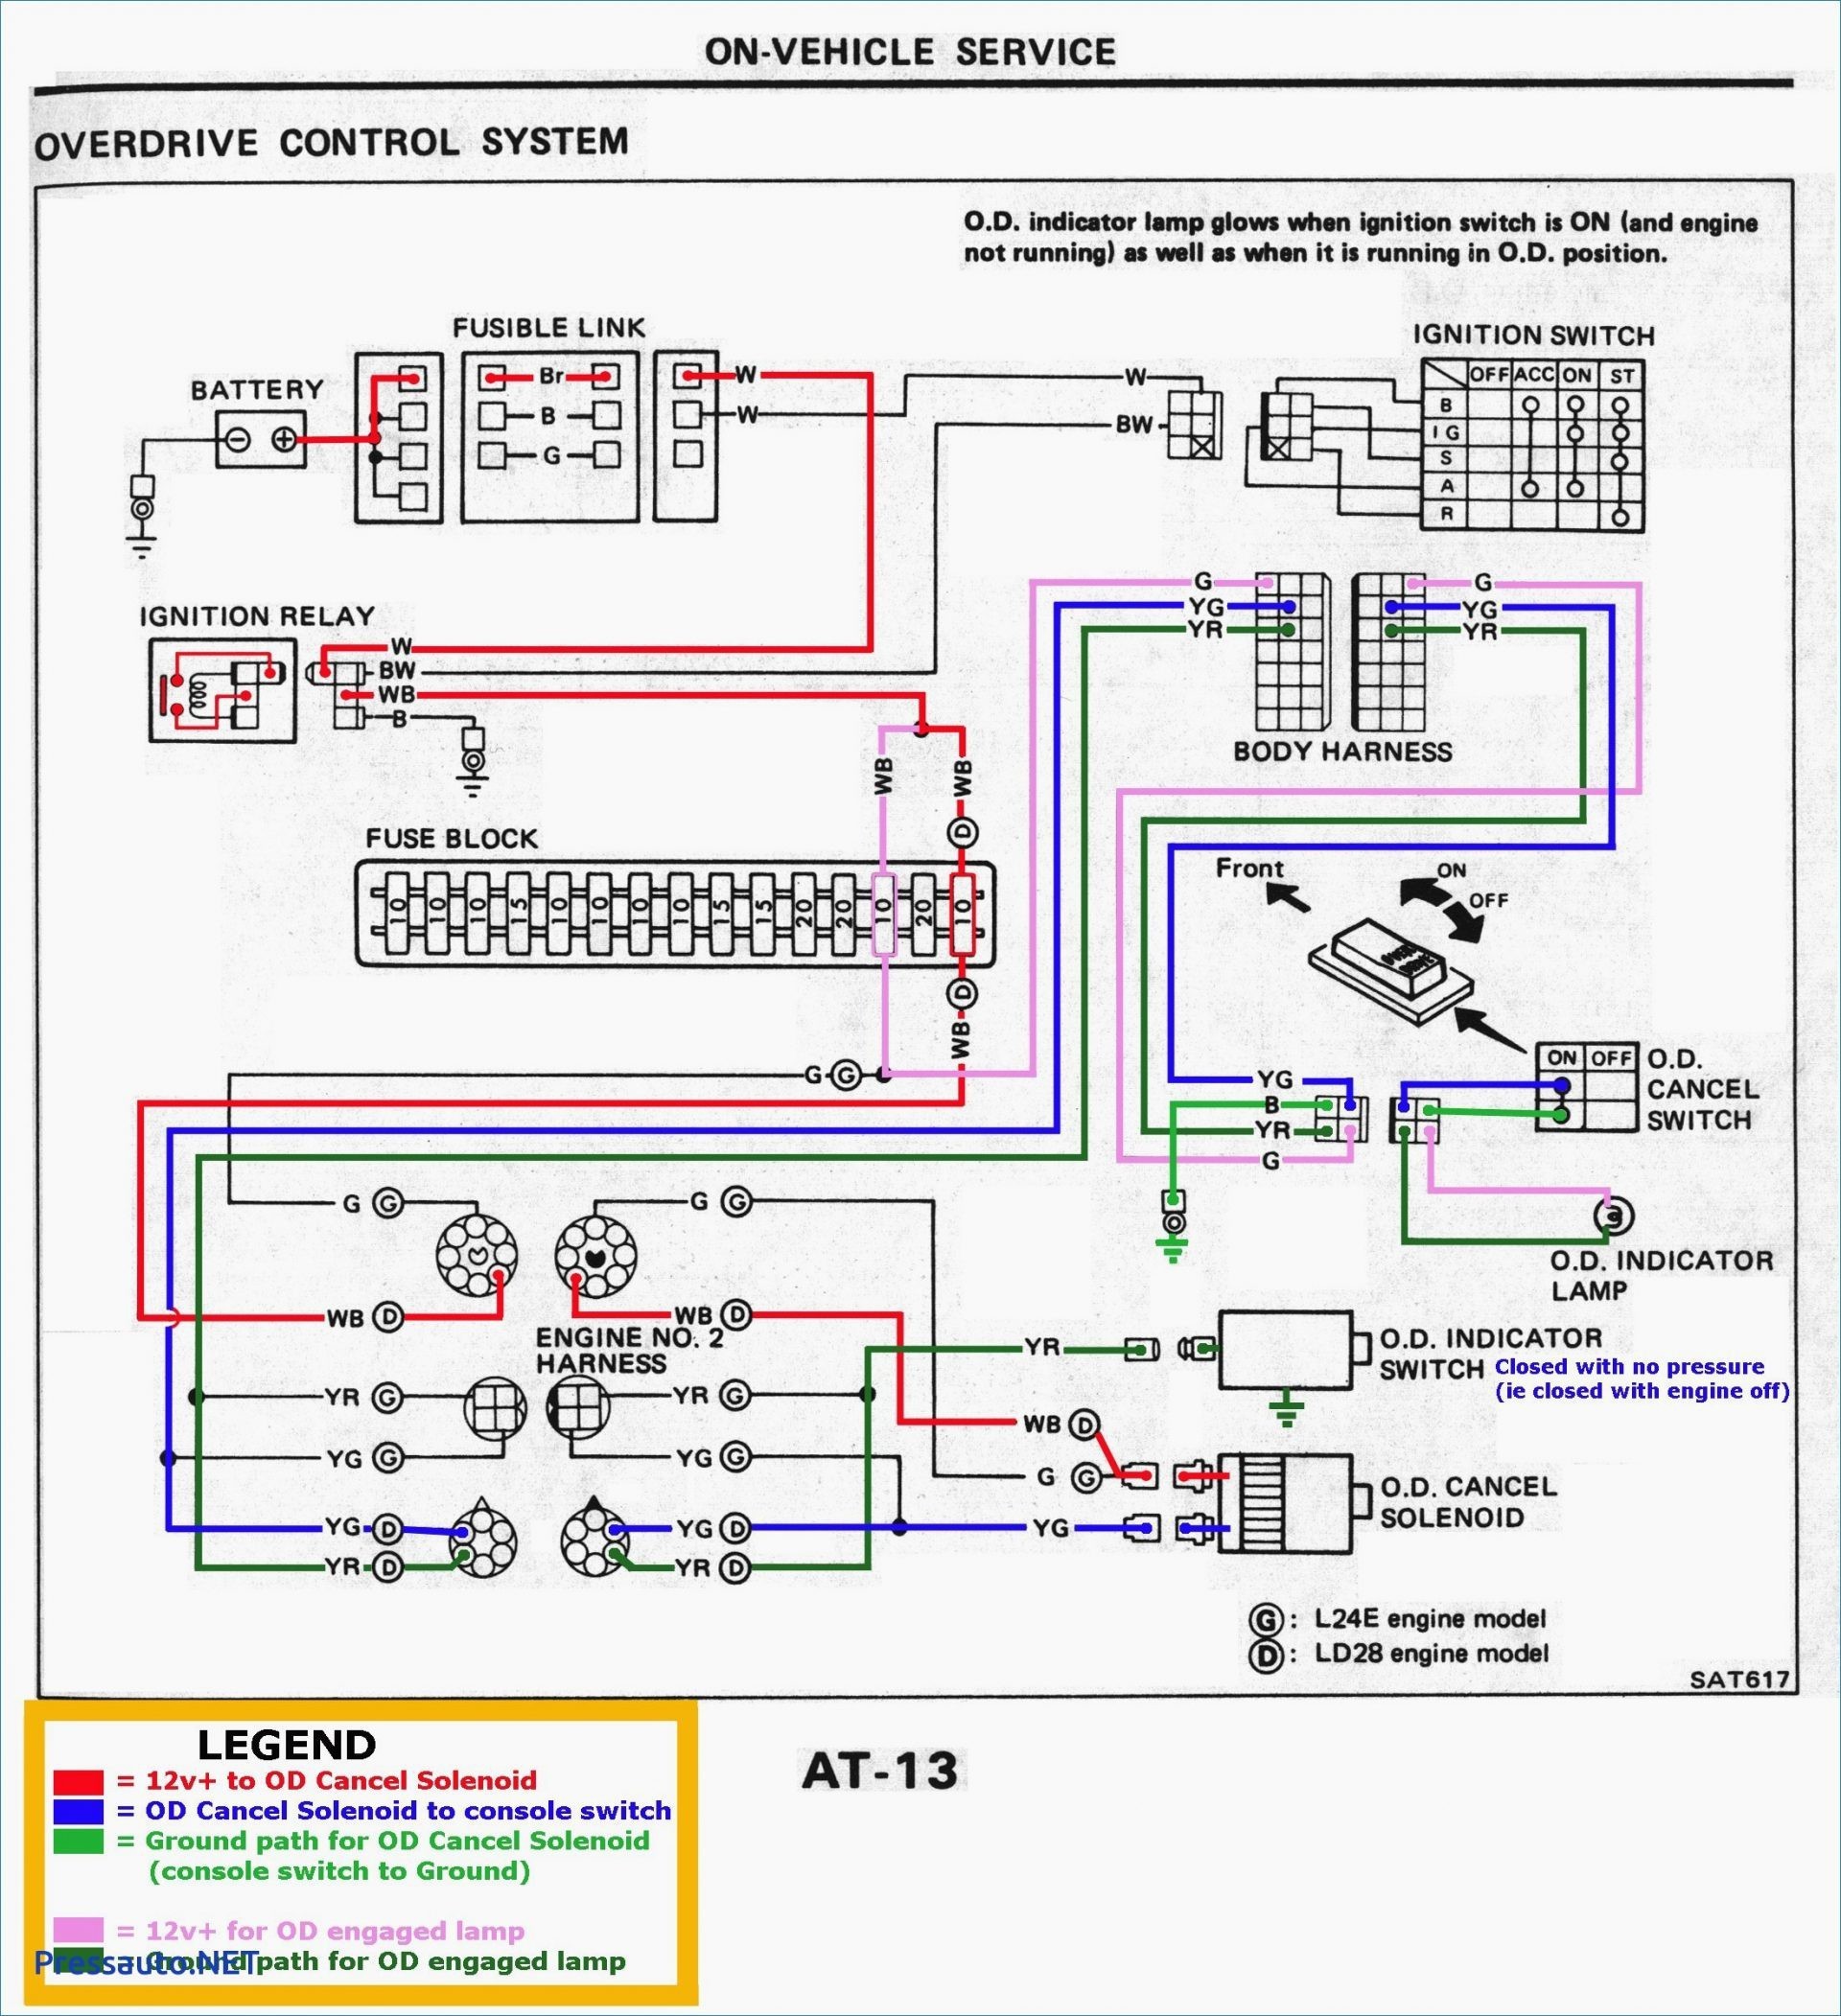 Wiring Diagram for Rear Trailer Lights Save 2003 S10 Tail Lights Best